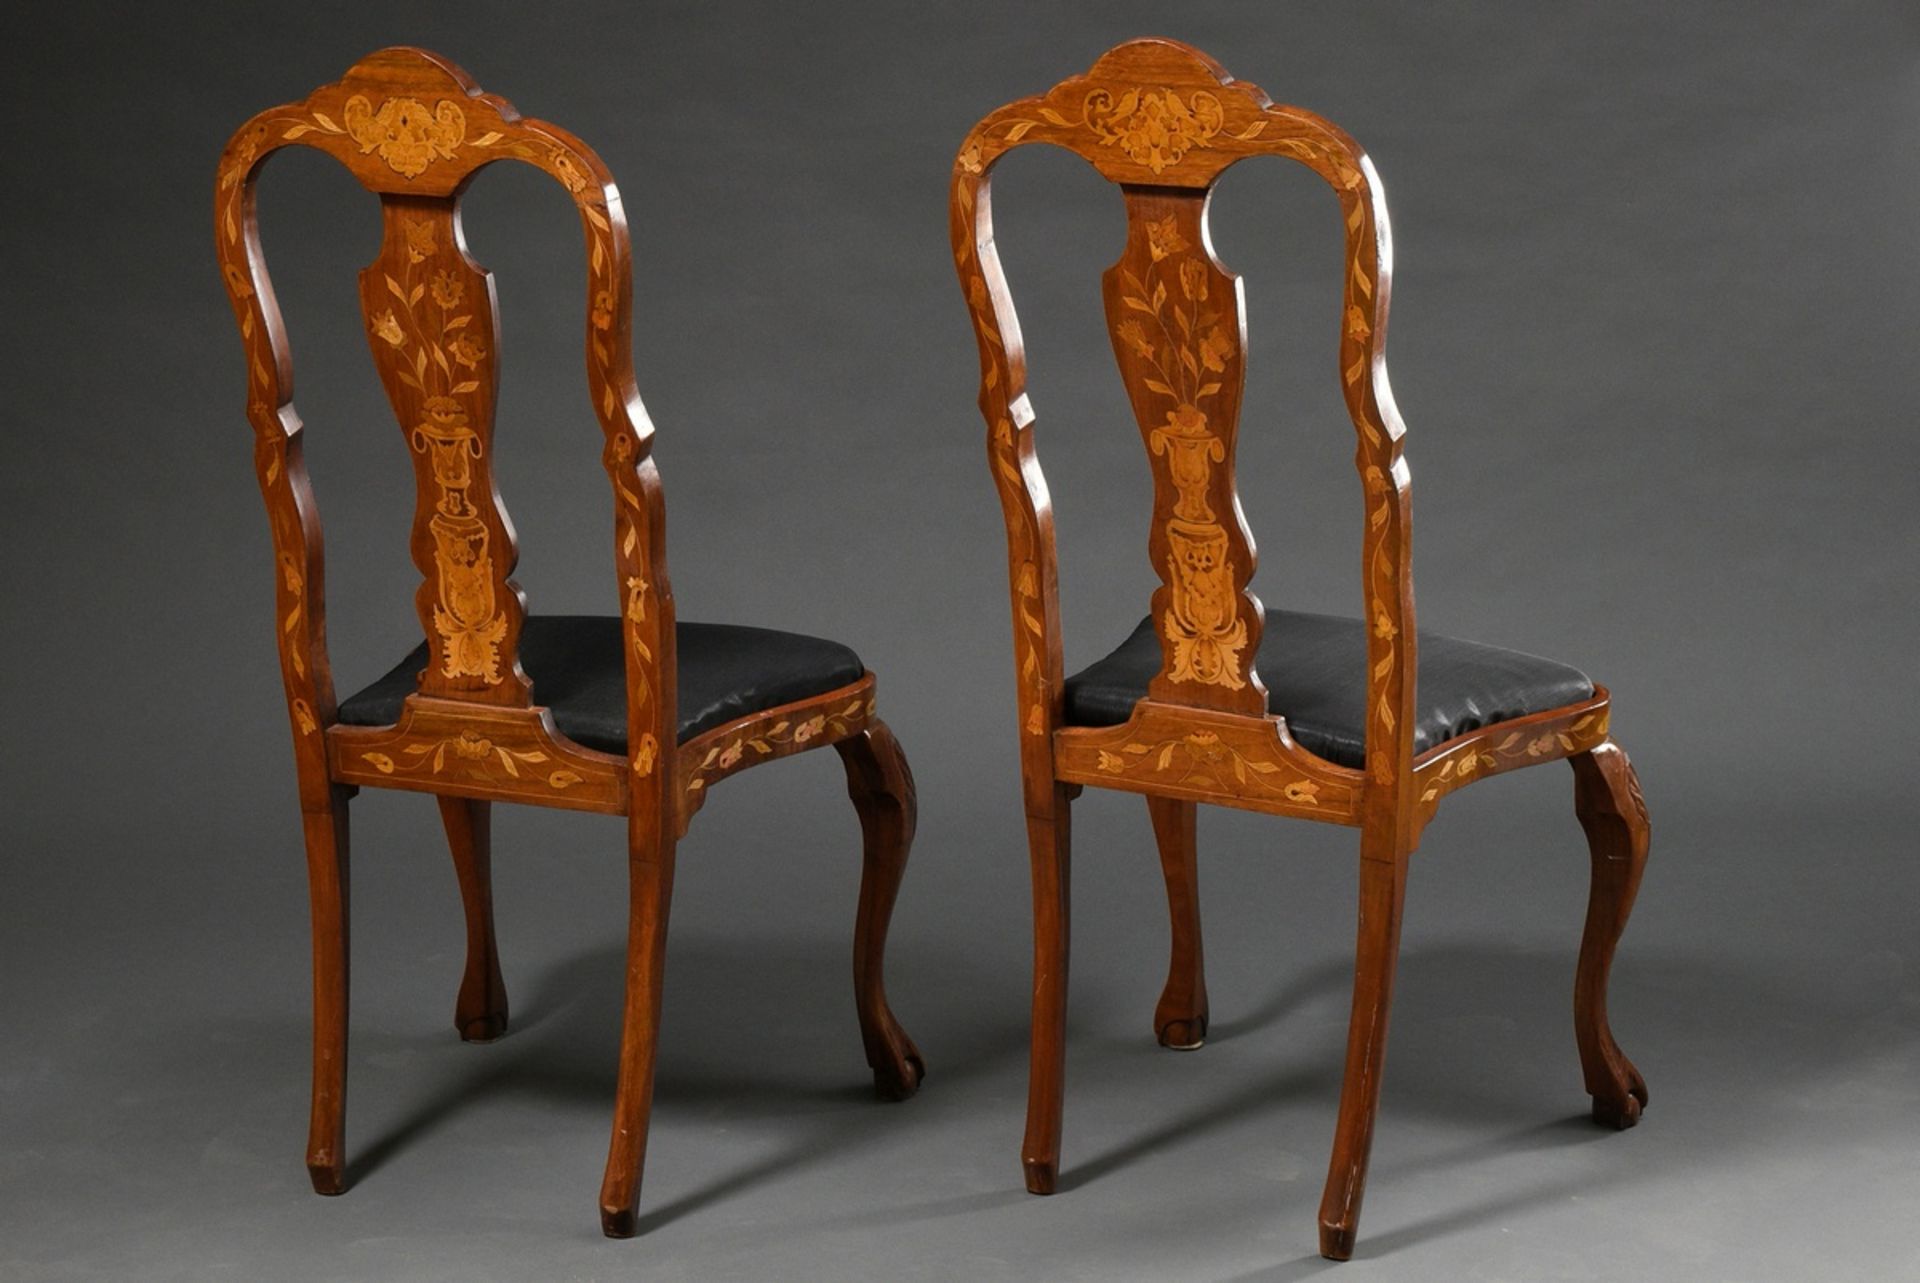 Pair of baroque chairs with elaborately inlaid frames "flower basket and vase with bird" on curved  - Image 8 of 11